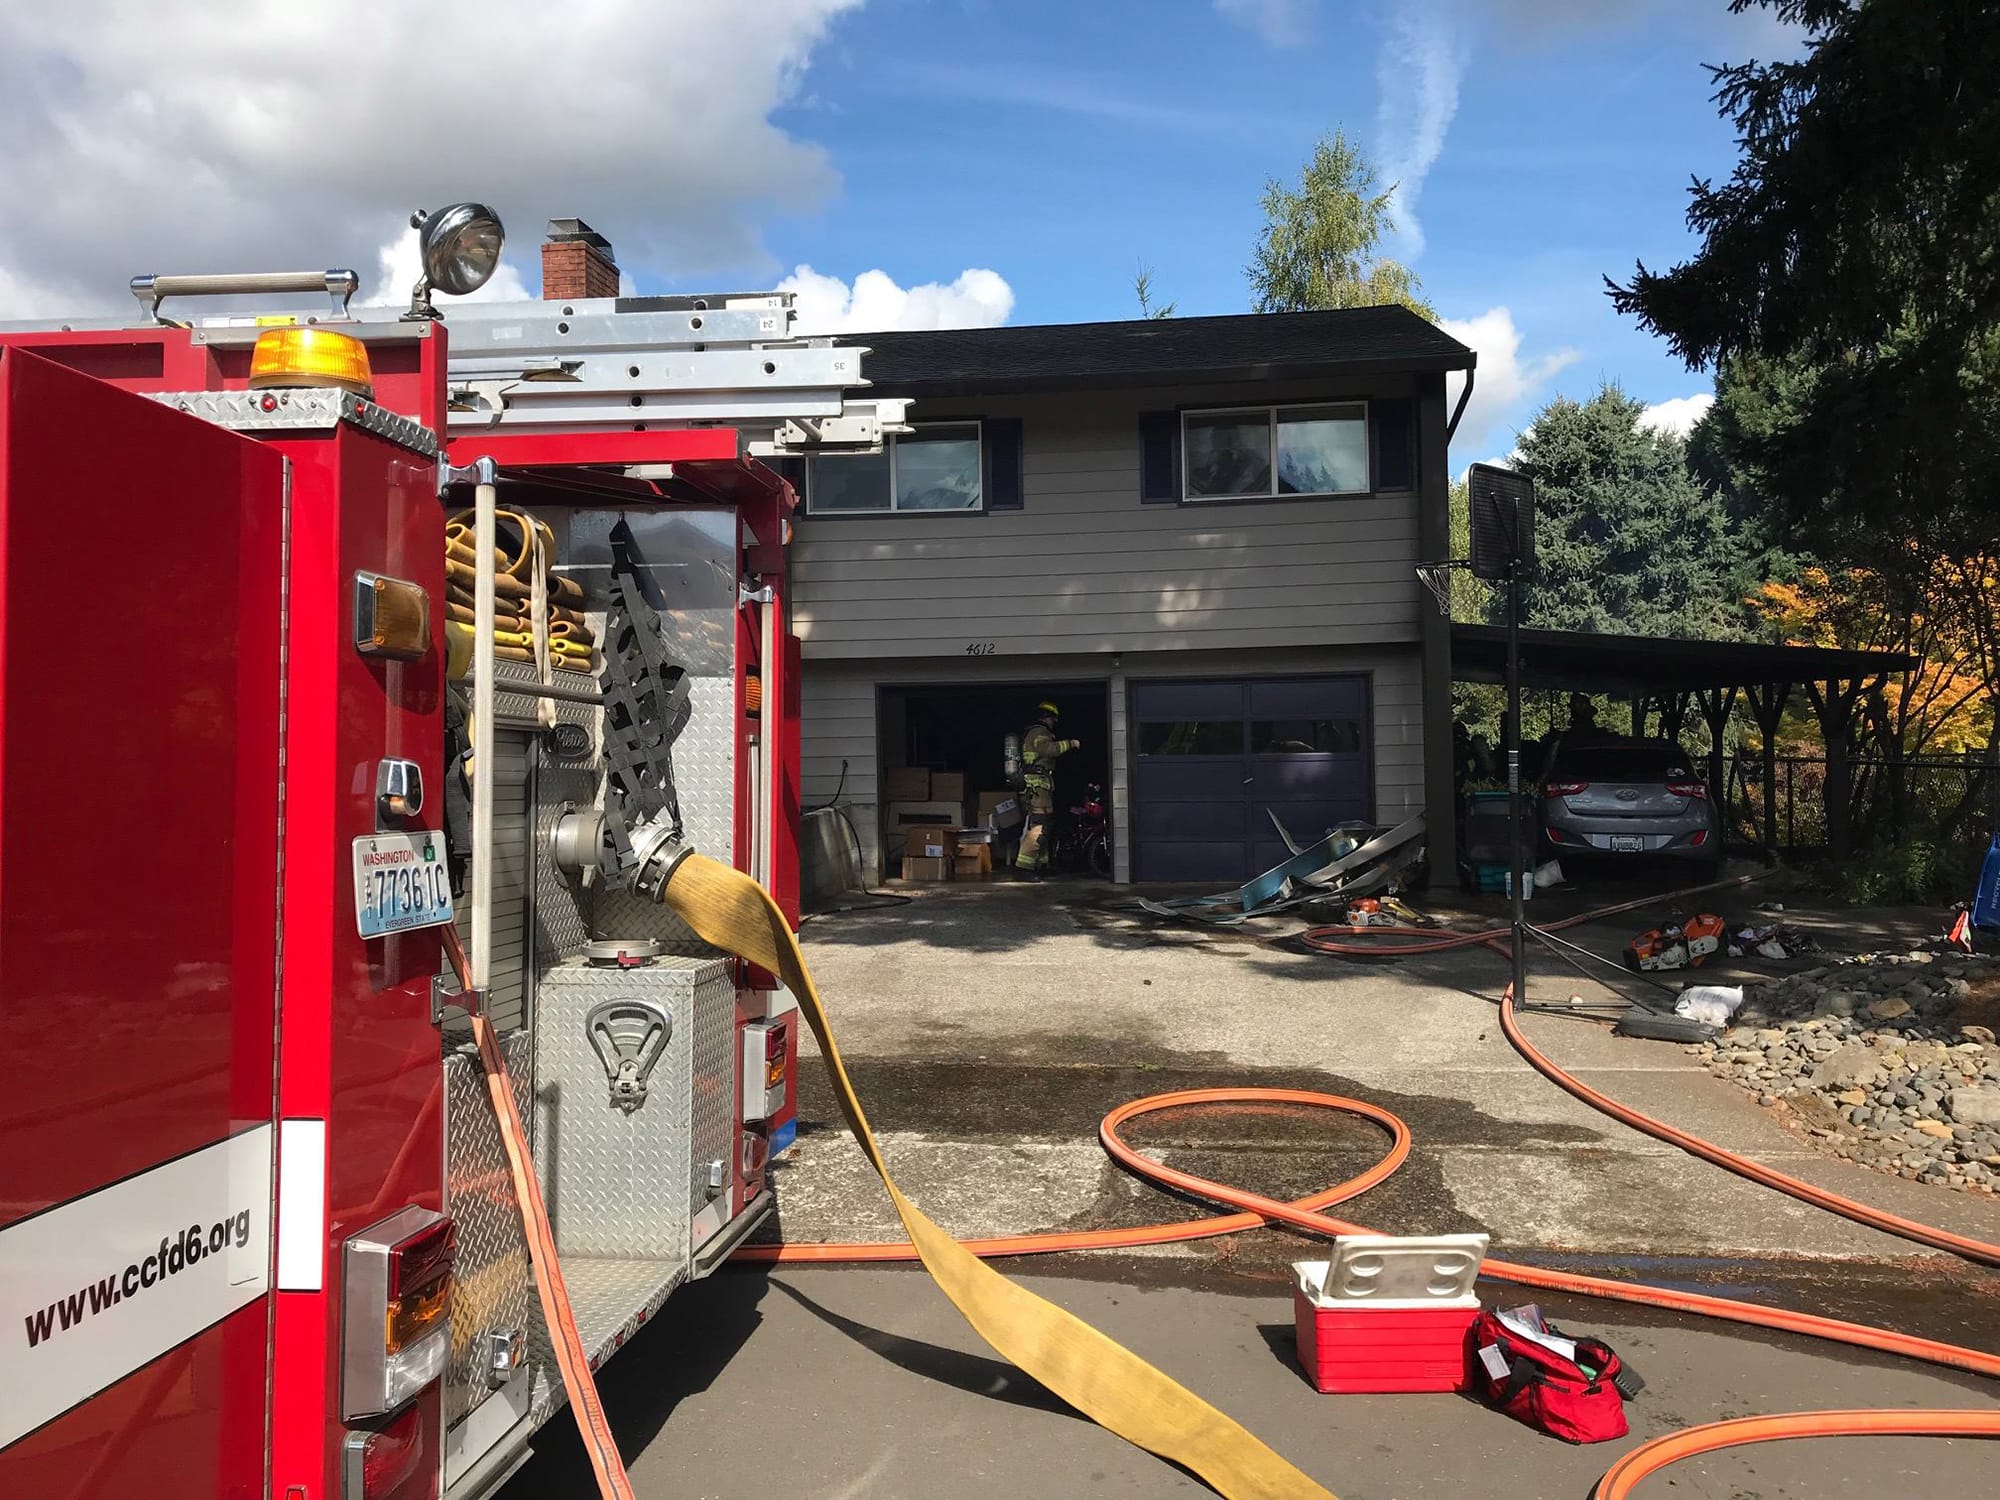 Vancouver Fire Department and Clark County Fire District 6 firefighters root through a garage in the Barberton area north of Vancouver on Sept. 20. No one was injured, and the fire was largely contained to the garage.